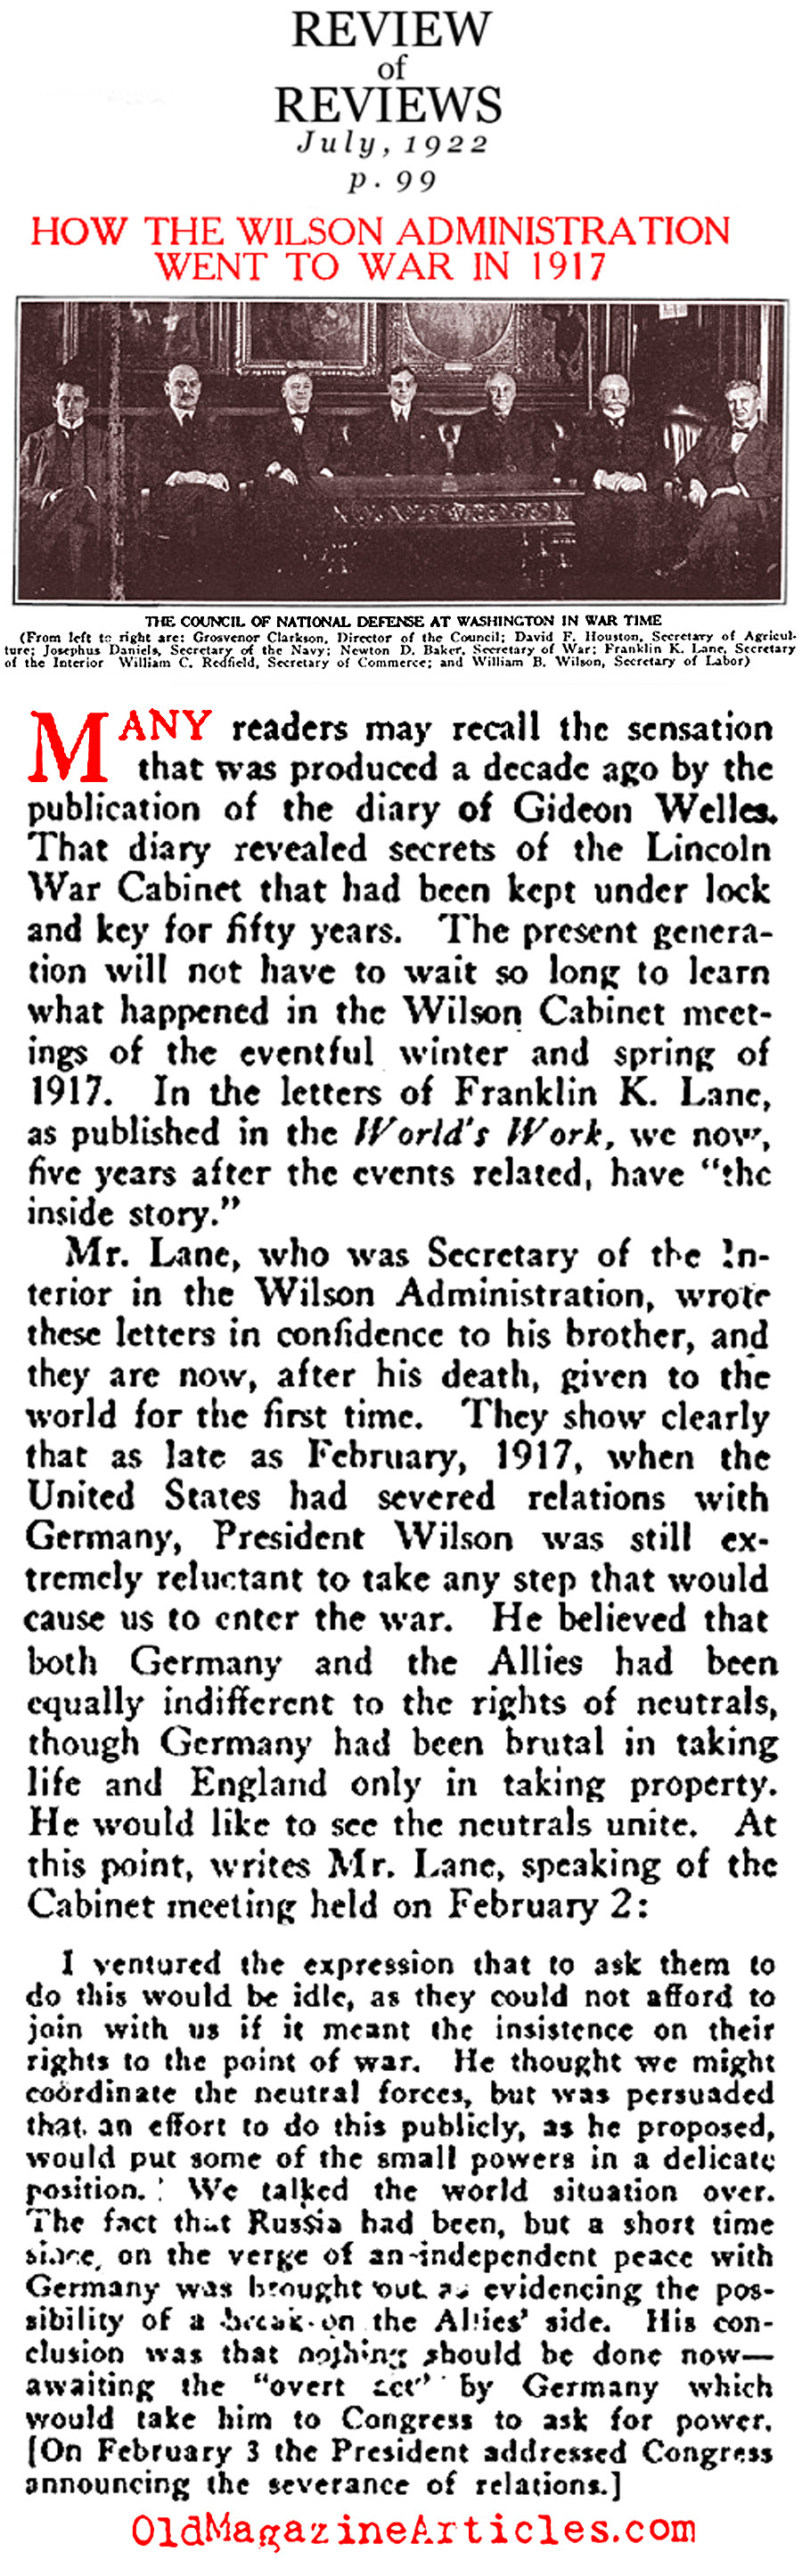 President Wilson's War Cabinet Convenes (Review of Reviews, 1922)